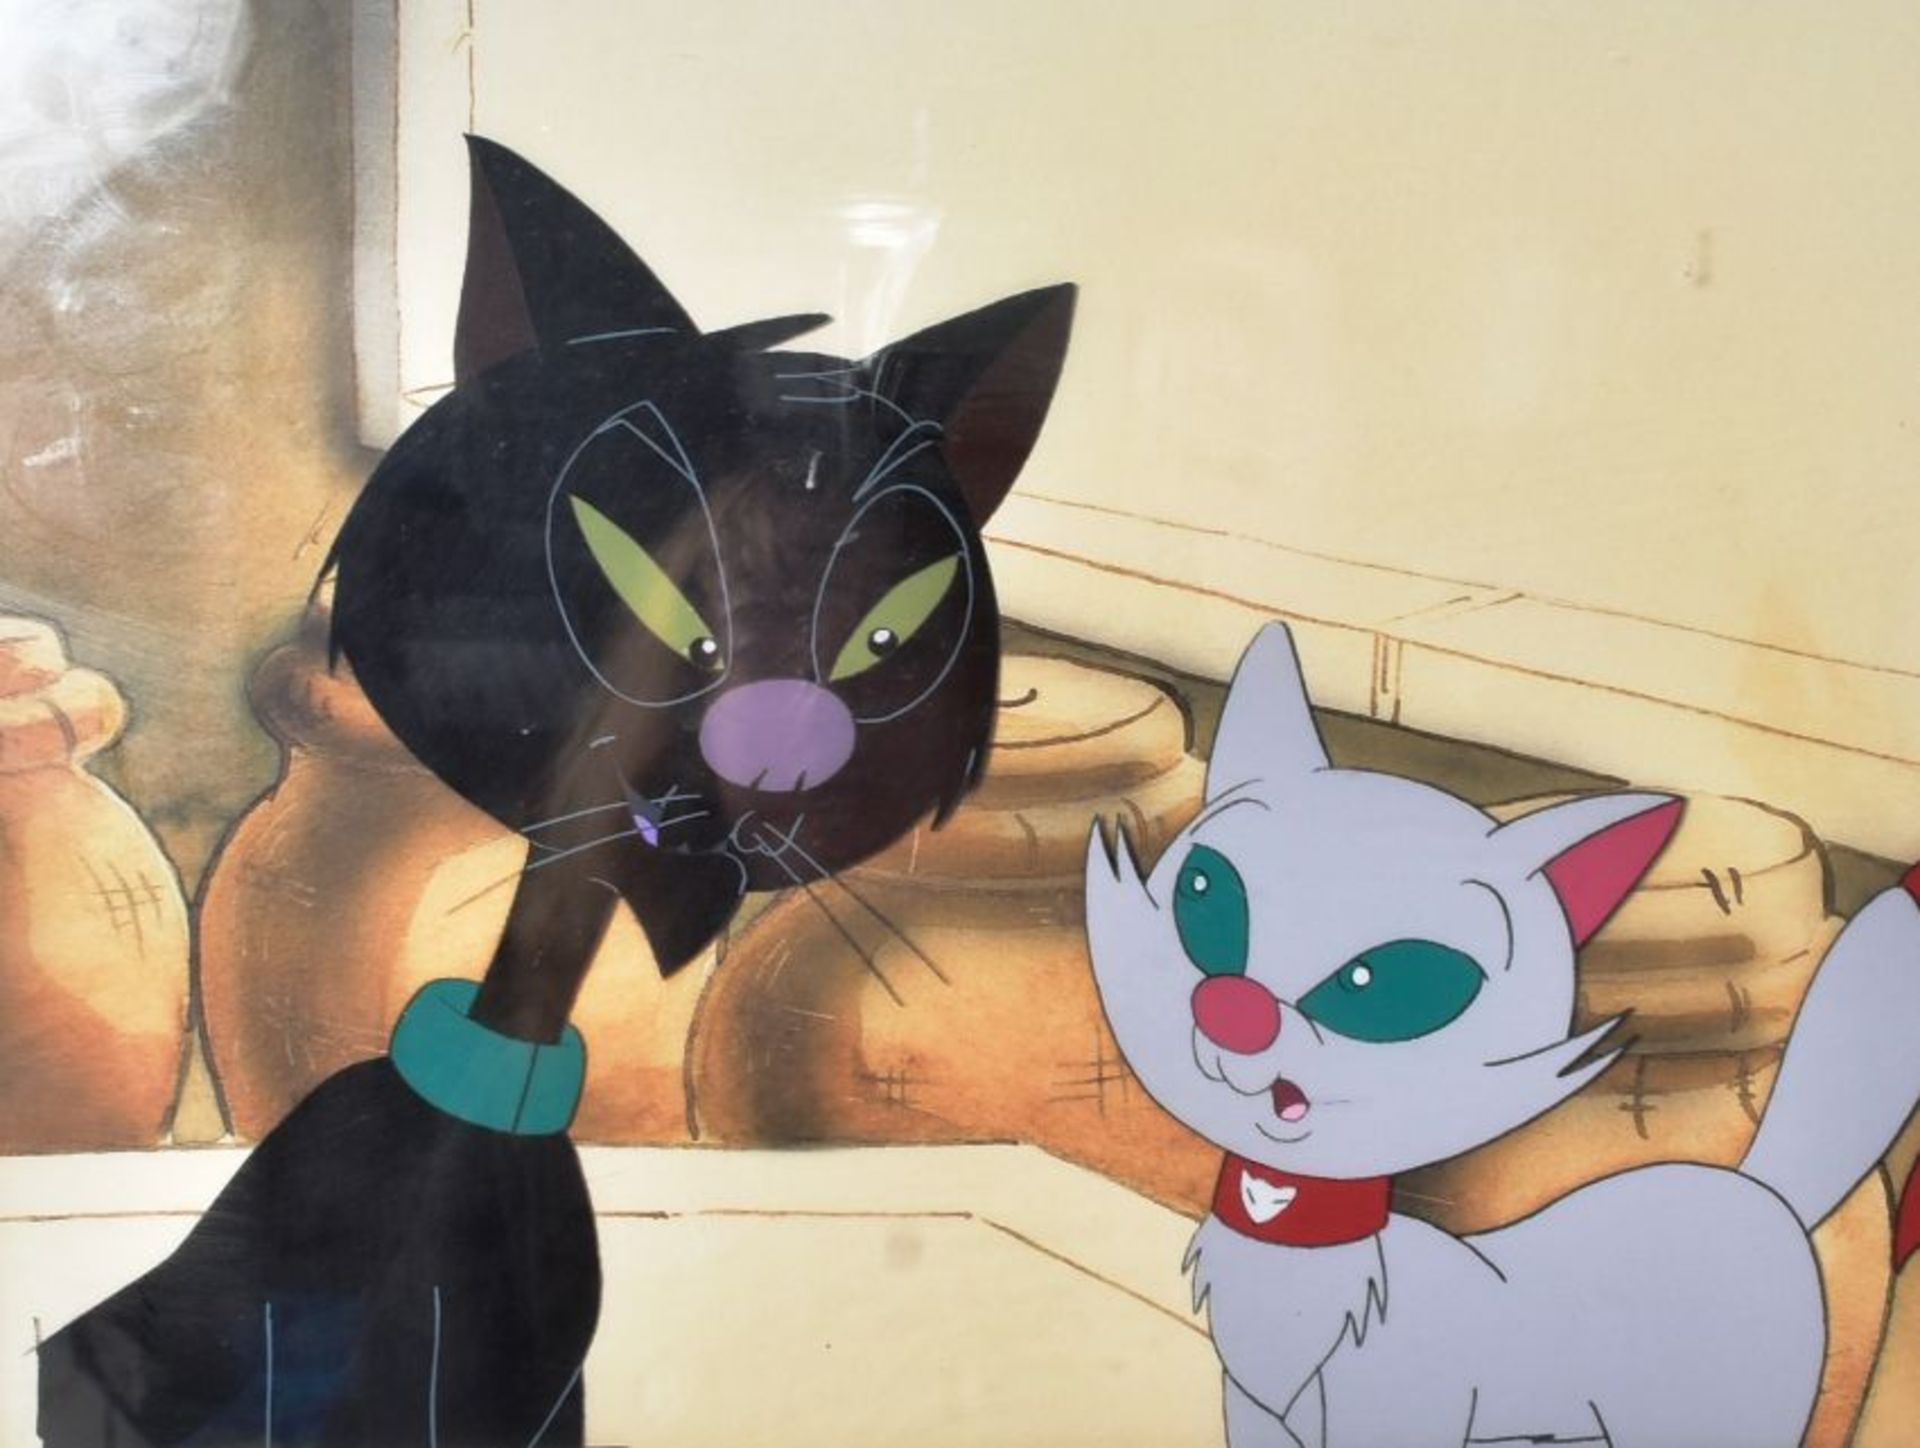 CALON TV COLLECTION - BILLY THE CAT (1996) ANIMATION CELS - Image 3 of 6